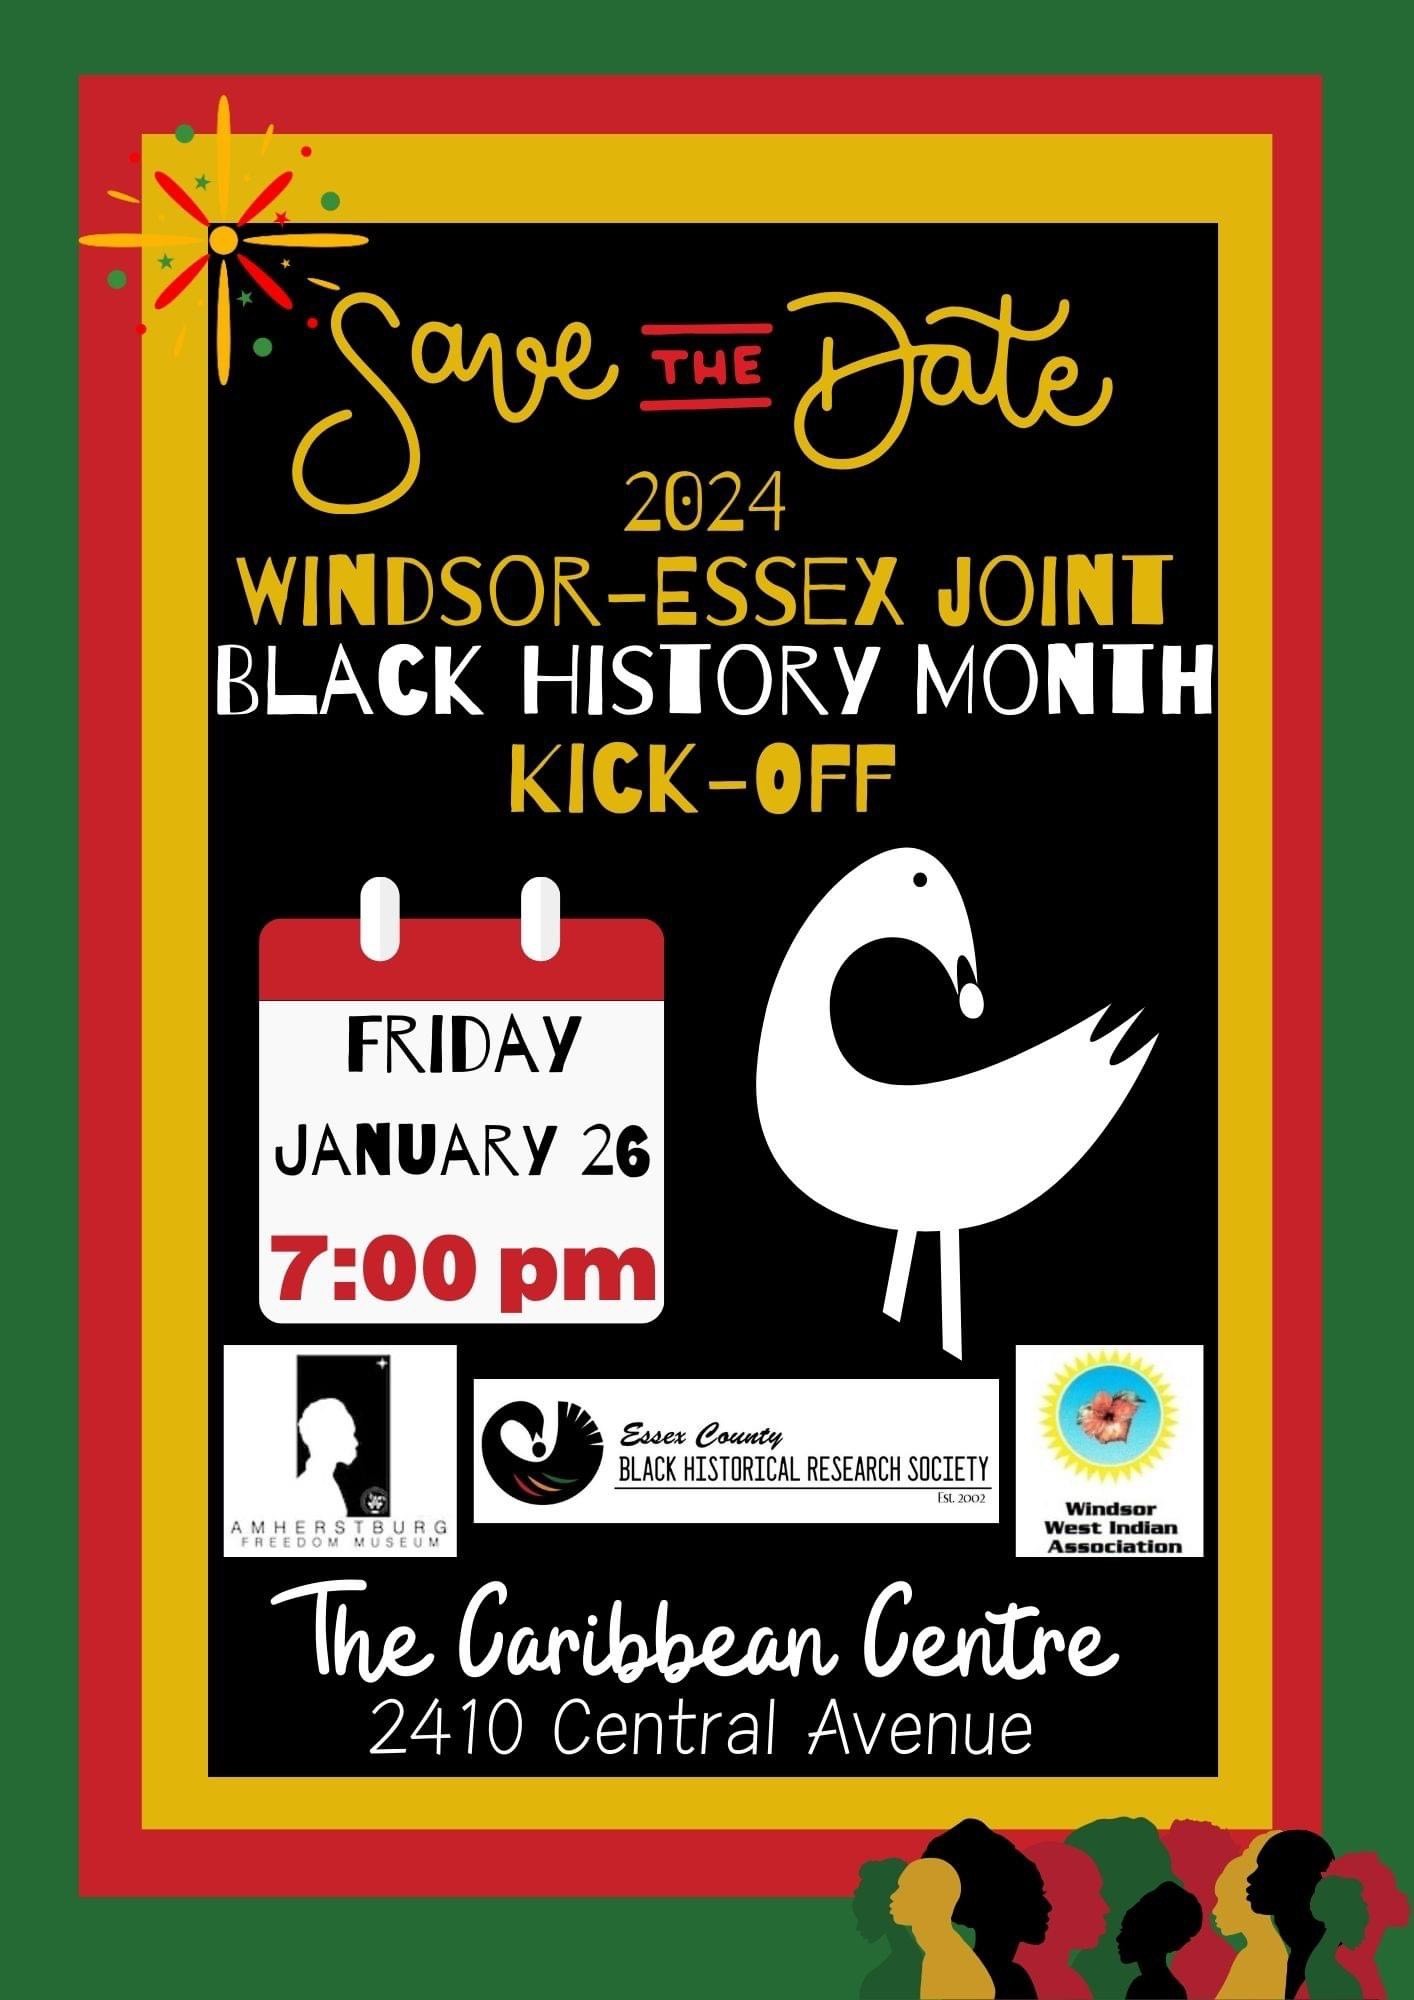 Poster with text Save the Date 2024 Windsor-Essex joint Black history month kick-off Fri. Jan. 26 7pm The Caribbean Centre 2410 Central Ave. and the logos for the Amherstburg Freedom Museum Essex County Black Historical Research Society and Windsor West Indian Association